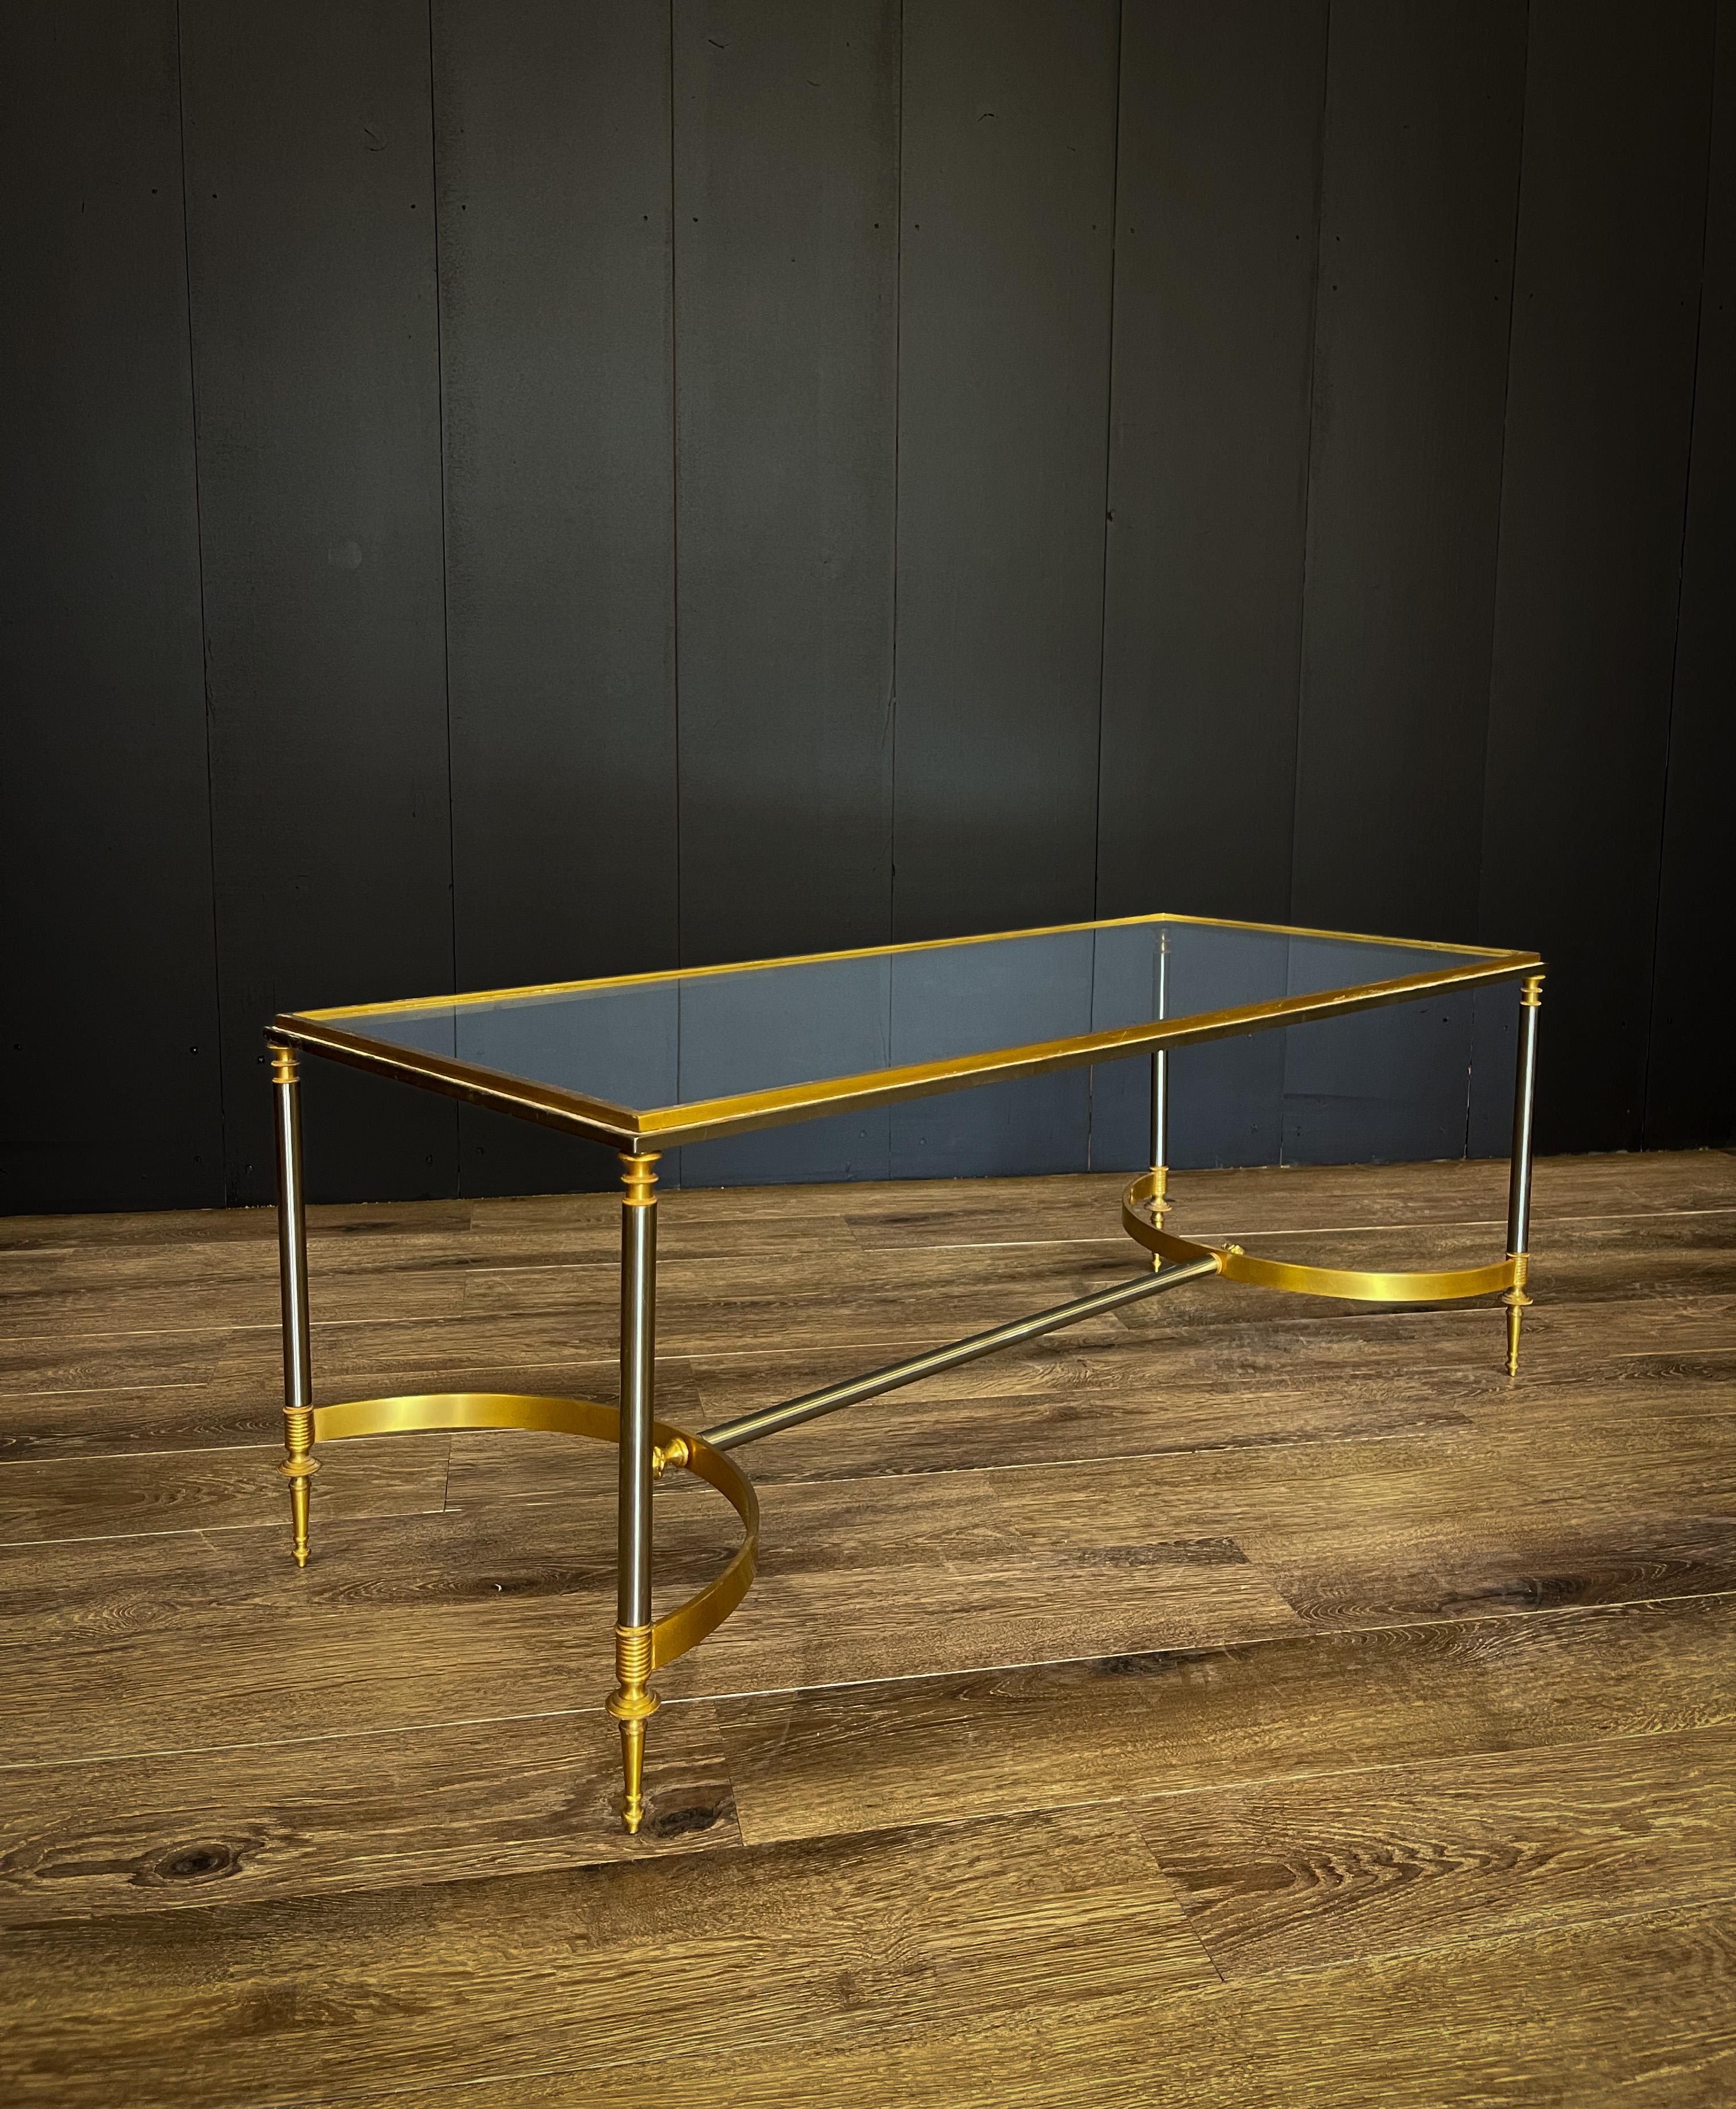 This beautiful Maison Jansen style Hollywood Regency coffee table oozes elegance with its golden brass curves and spindle foot and acorn detailing. Satin nickel legs finish this stunning piece.

42” L x 18” D x 16.5” T

Condition-minor scuffs to